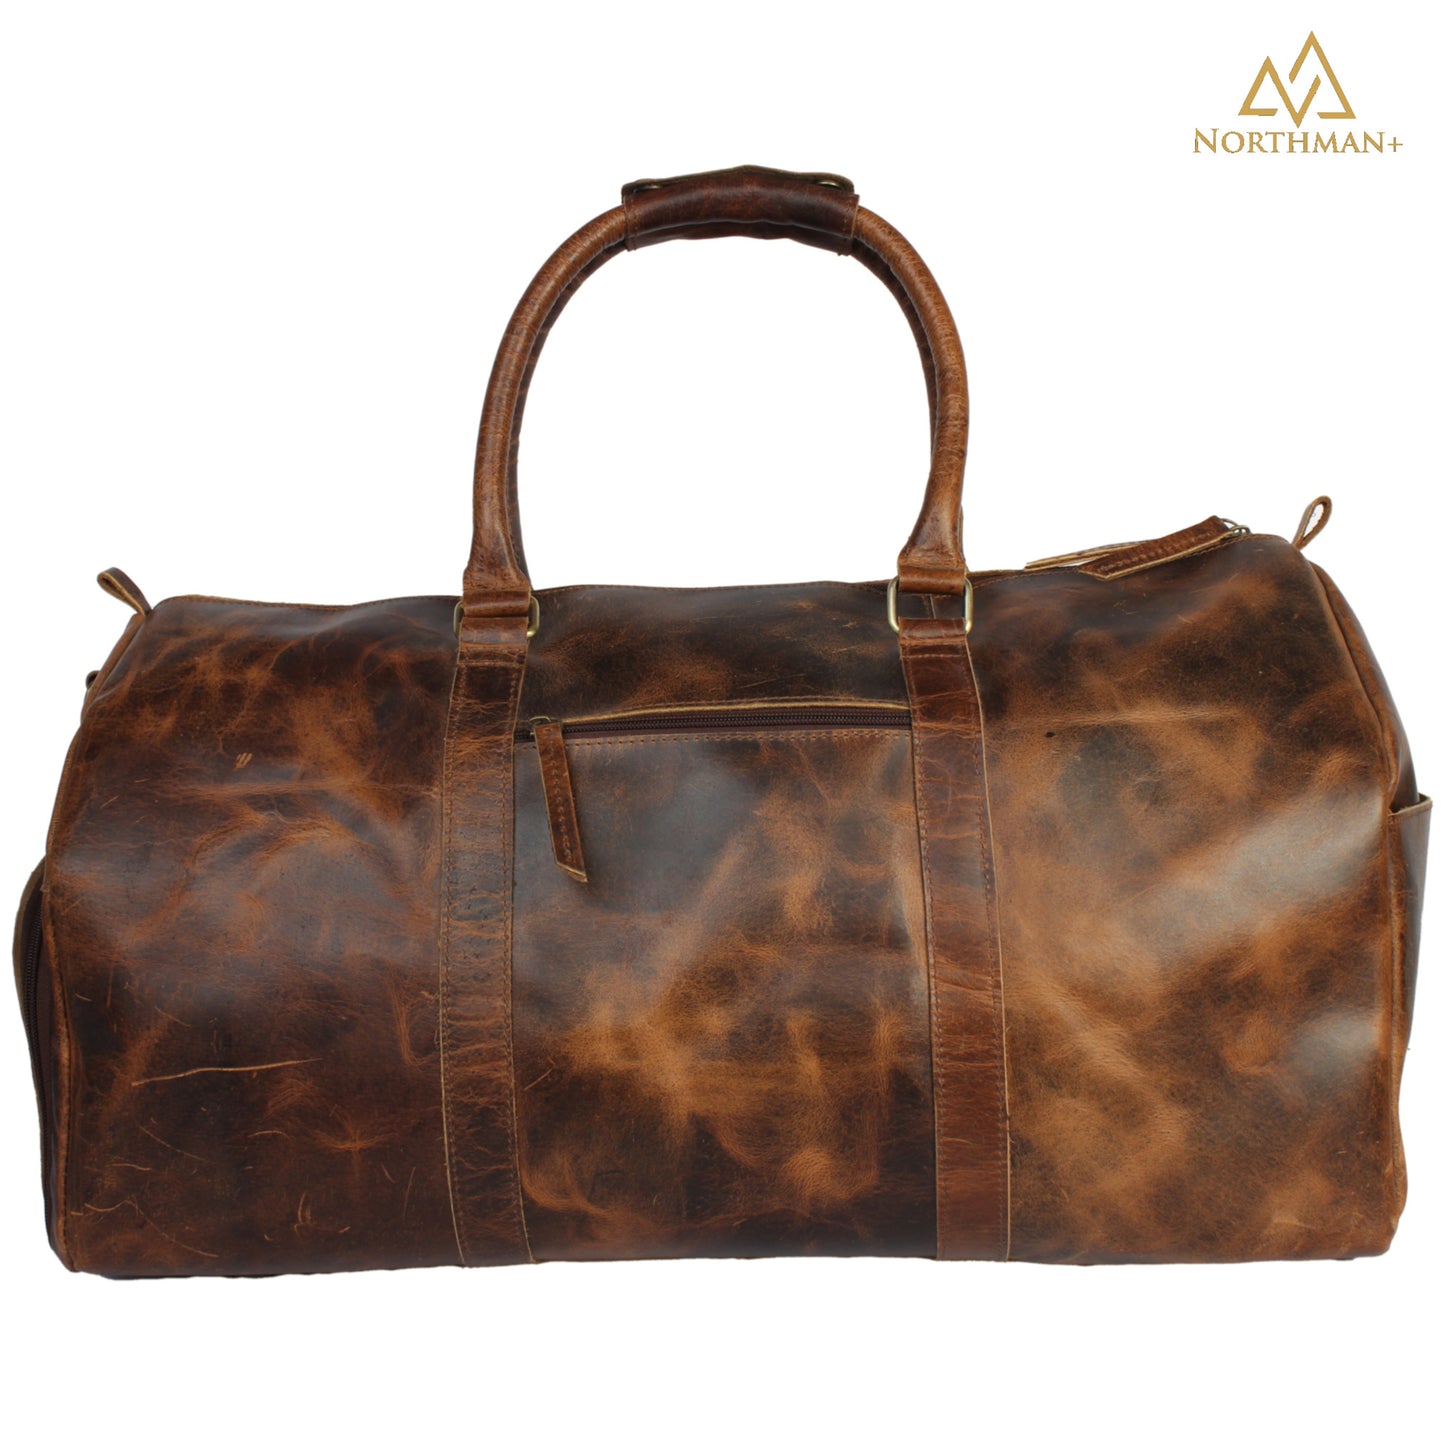 Leather Duffle Bag in Brown with dedicated pocket for Shoes